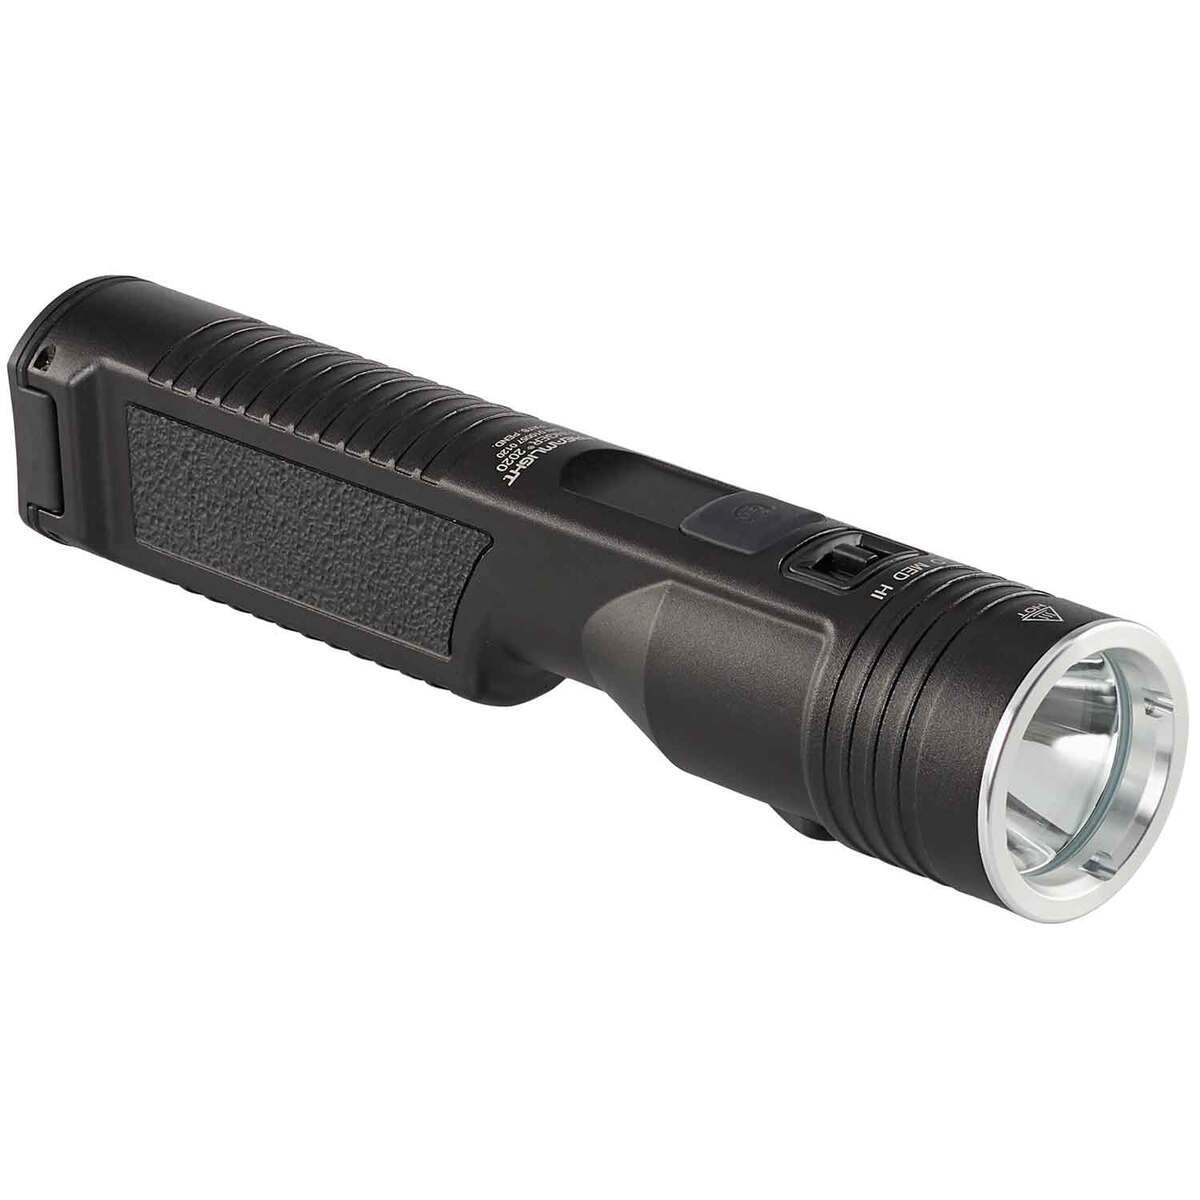 6 PACK Tactical Mini LED Flashlight single AA battery 300 Lumen Survival  Camping Light - Red, Black and Camo